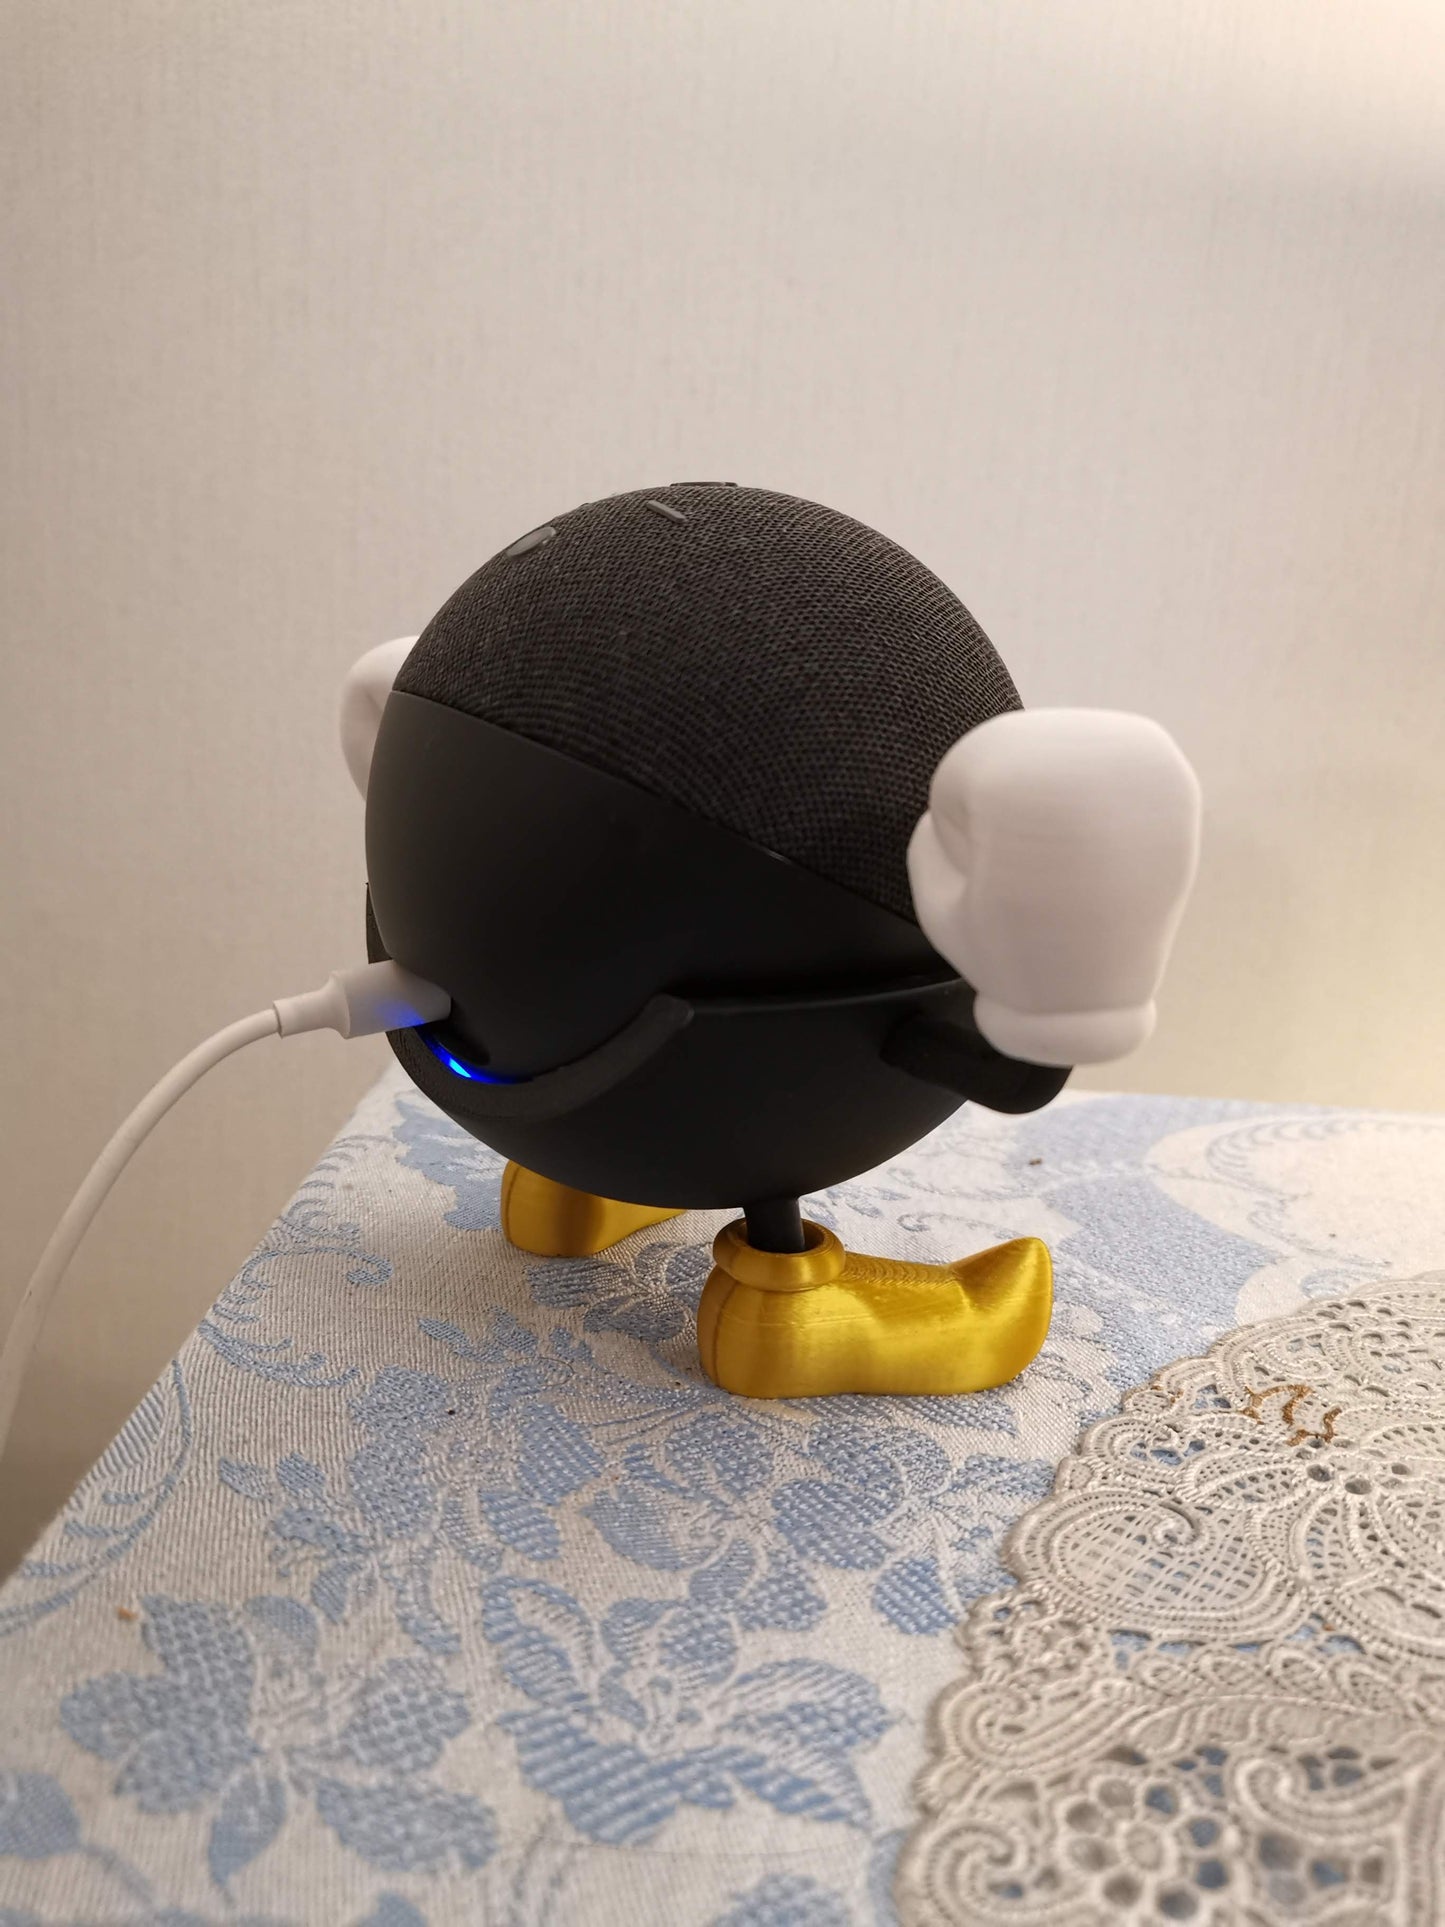 Bomb-omb Alexa Echo holder without crown from the back